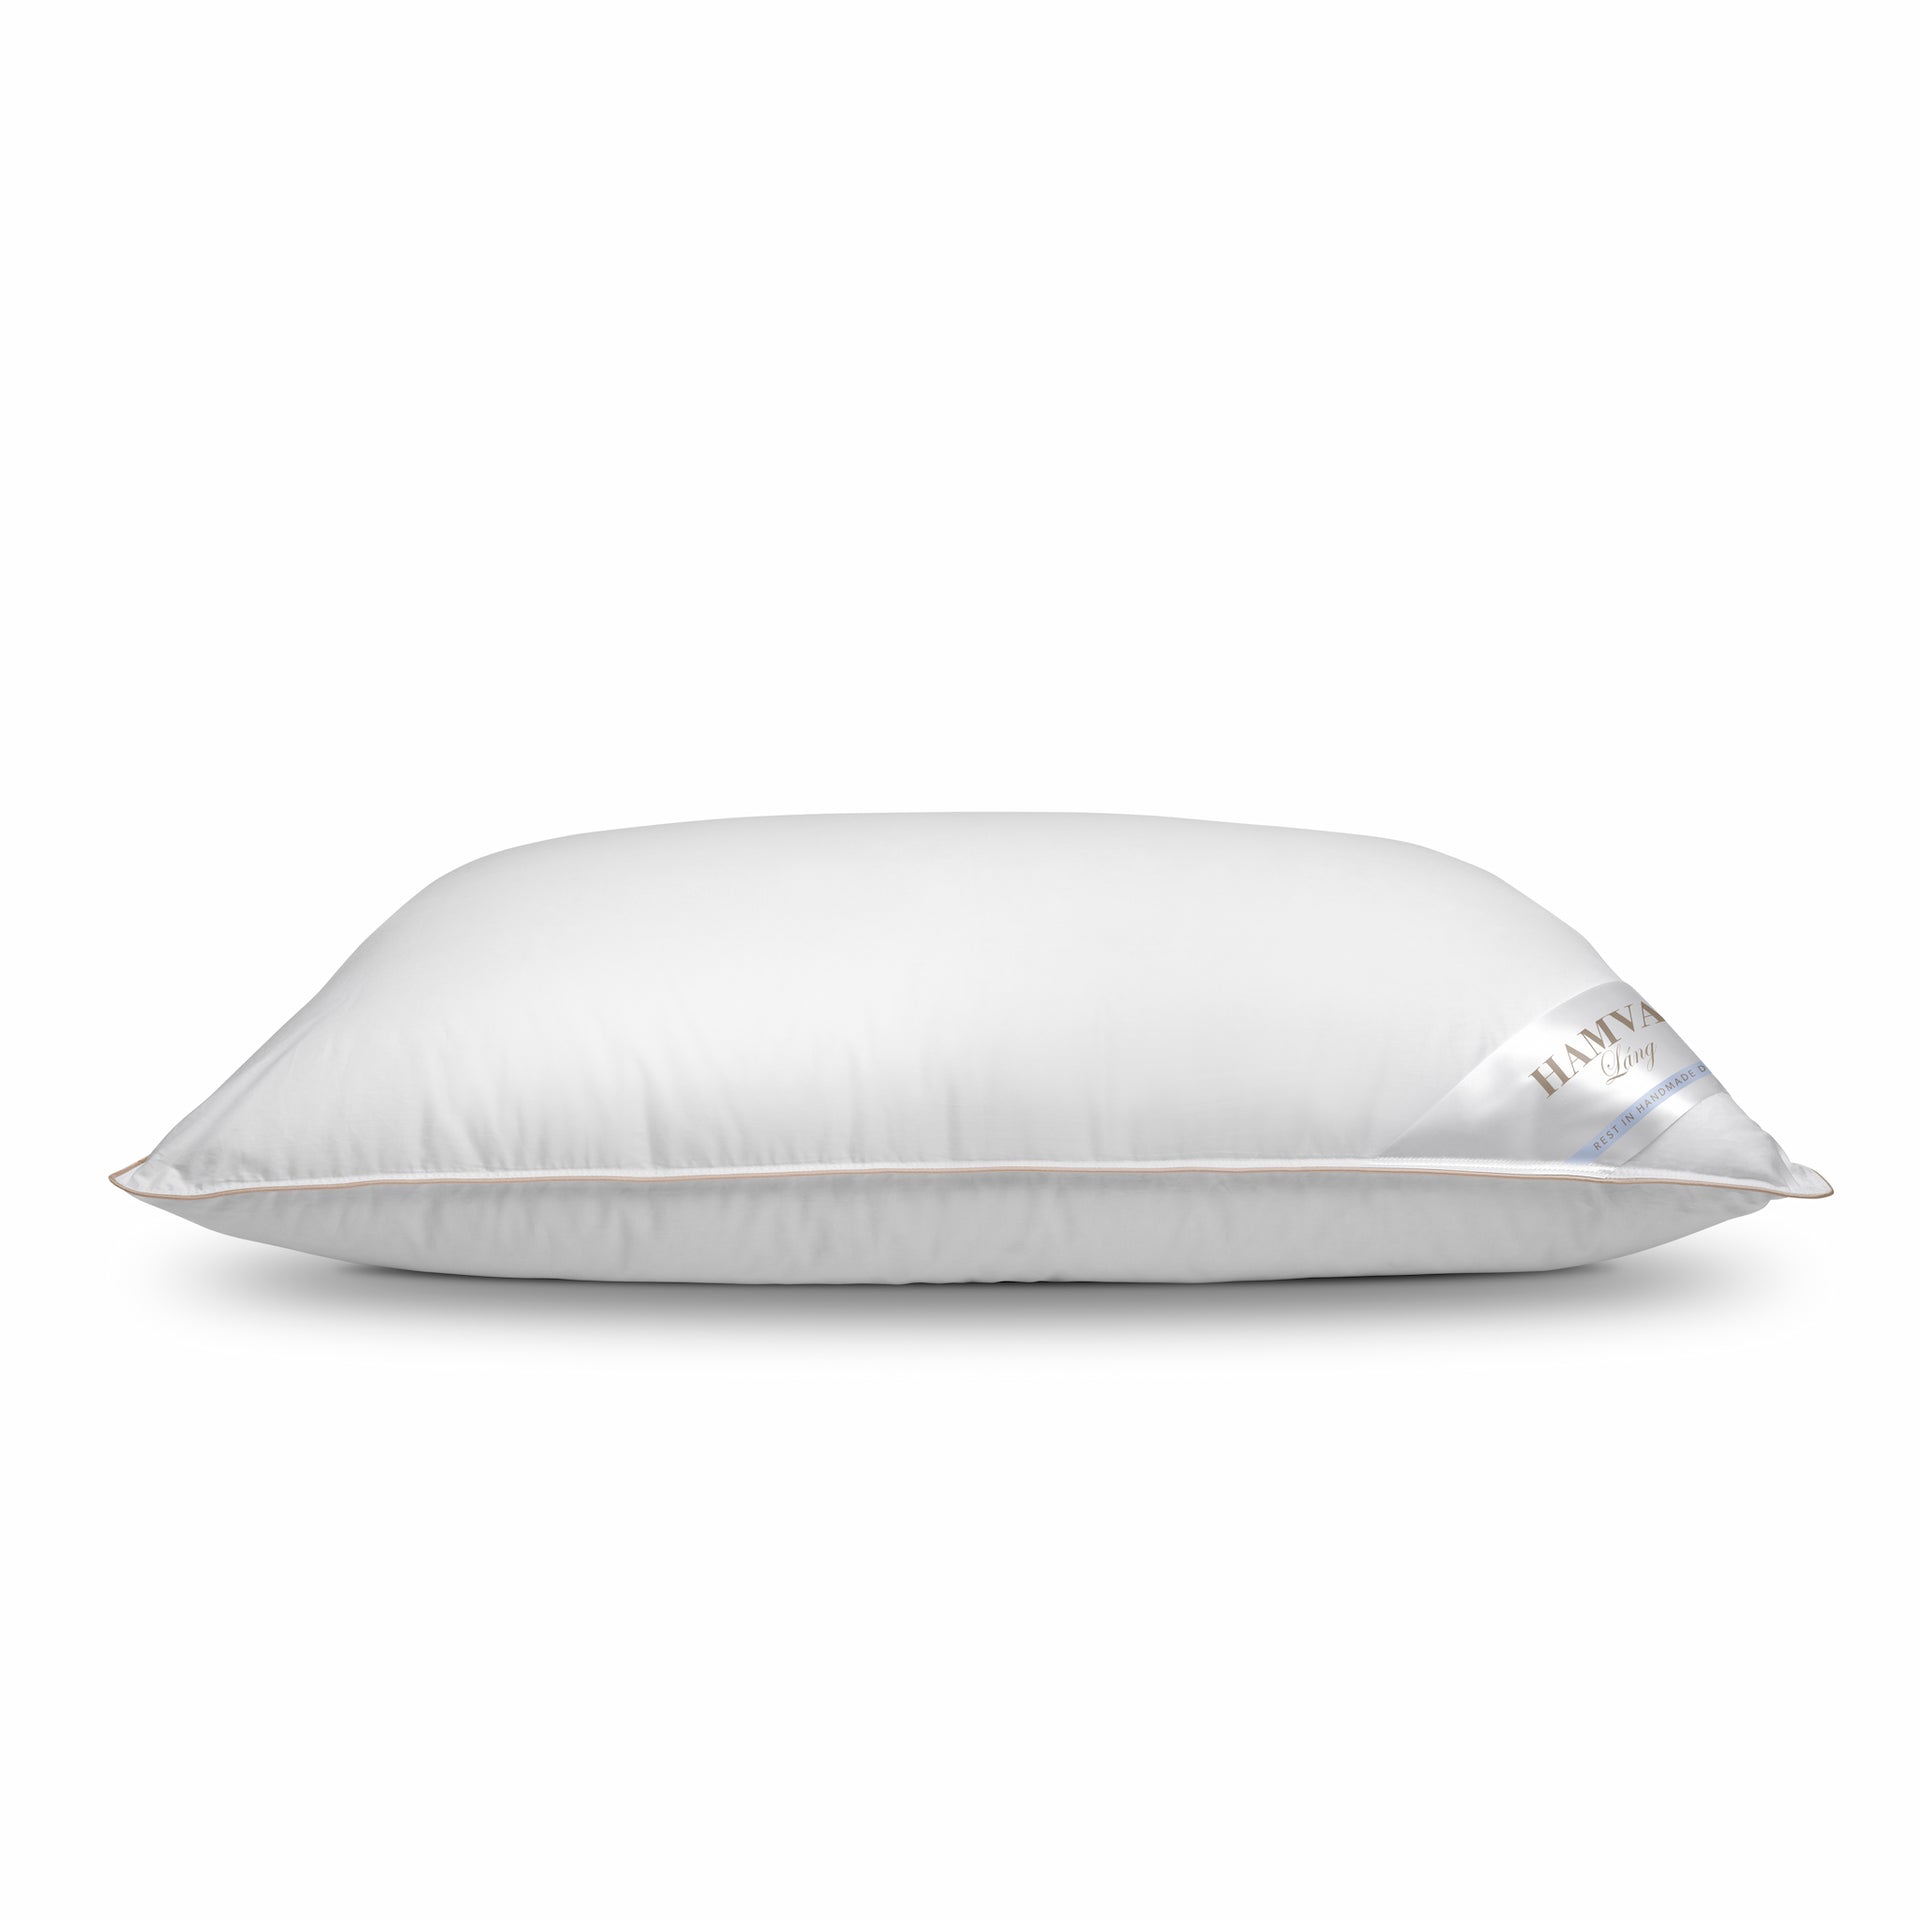 Feather and Down Neckroll Pillow Insert - White, Size 6 in. x 15 in., Cotton | The Company Store